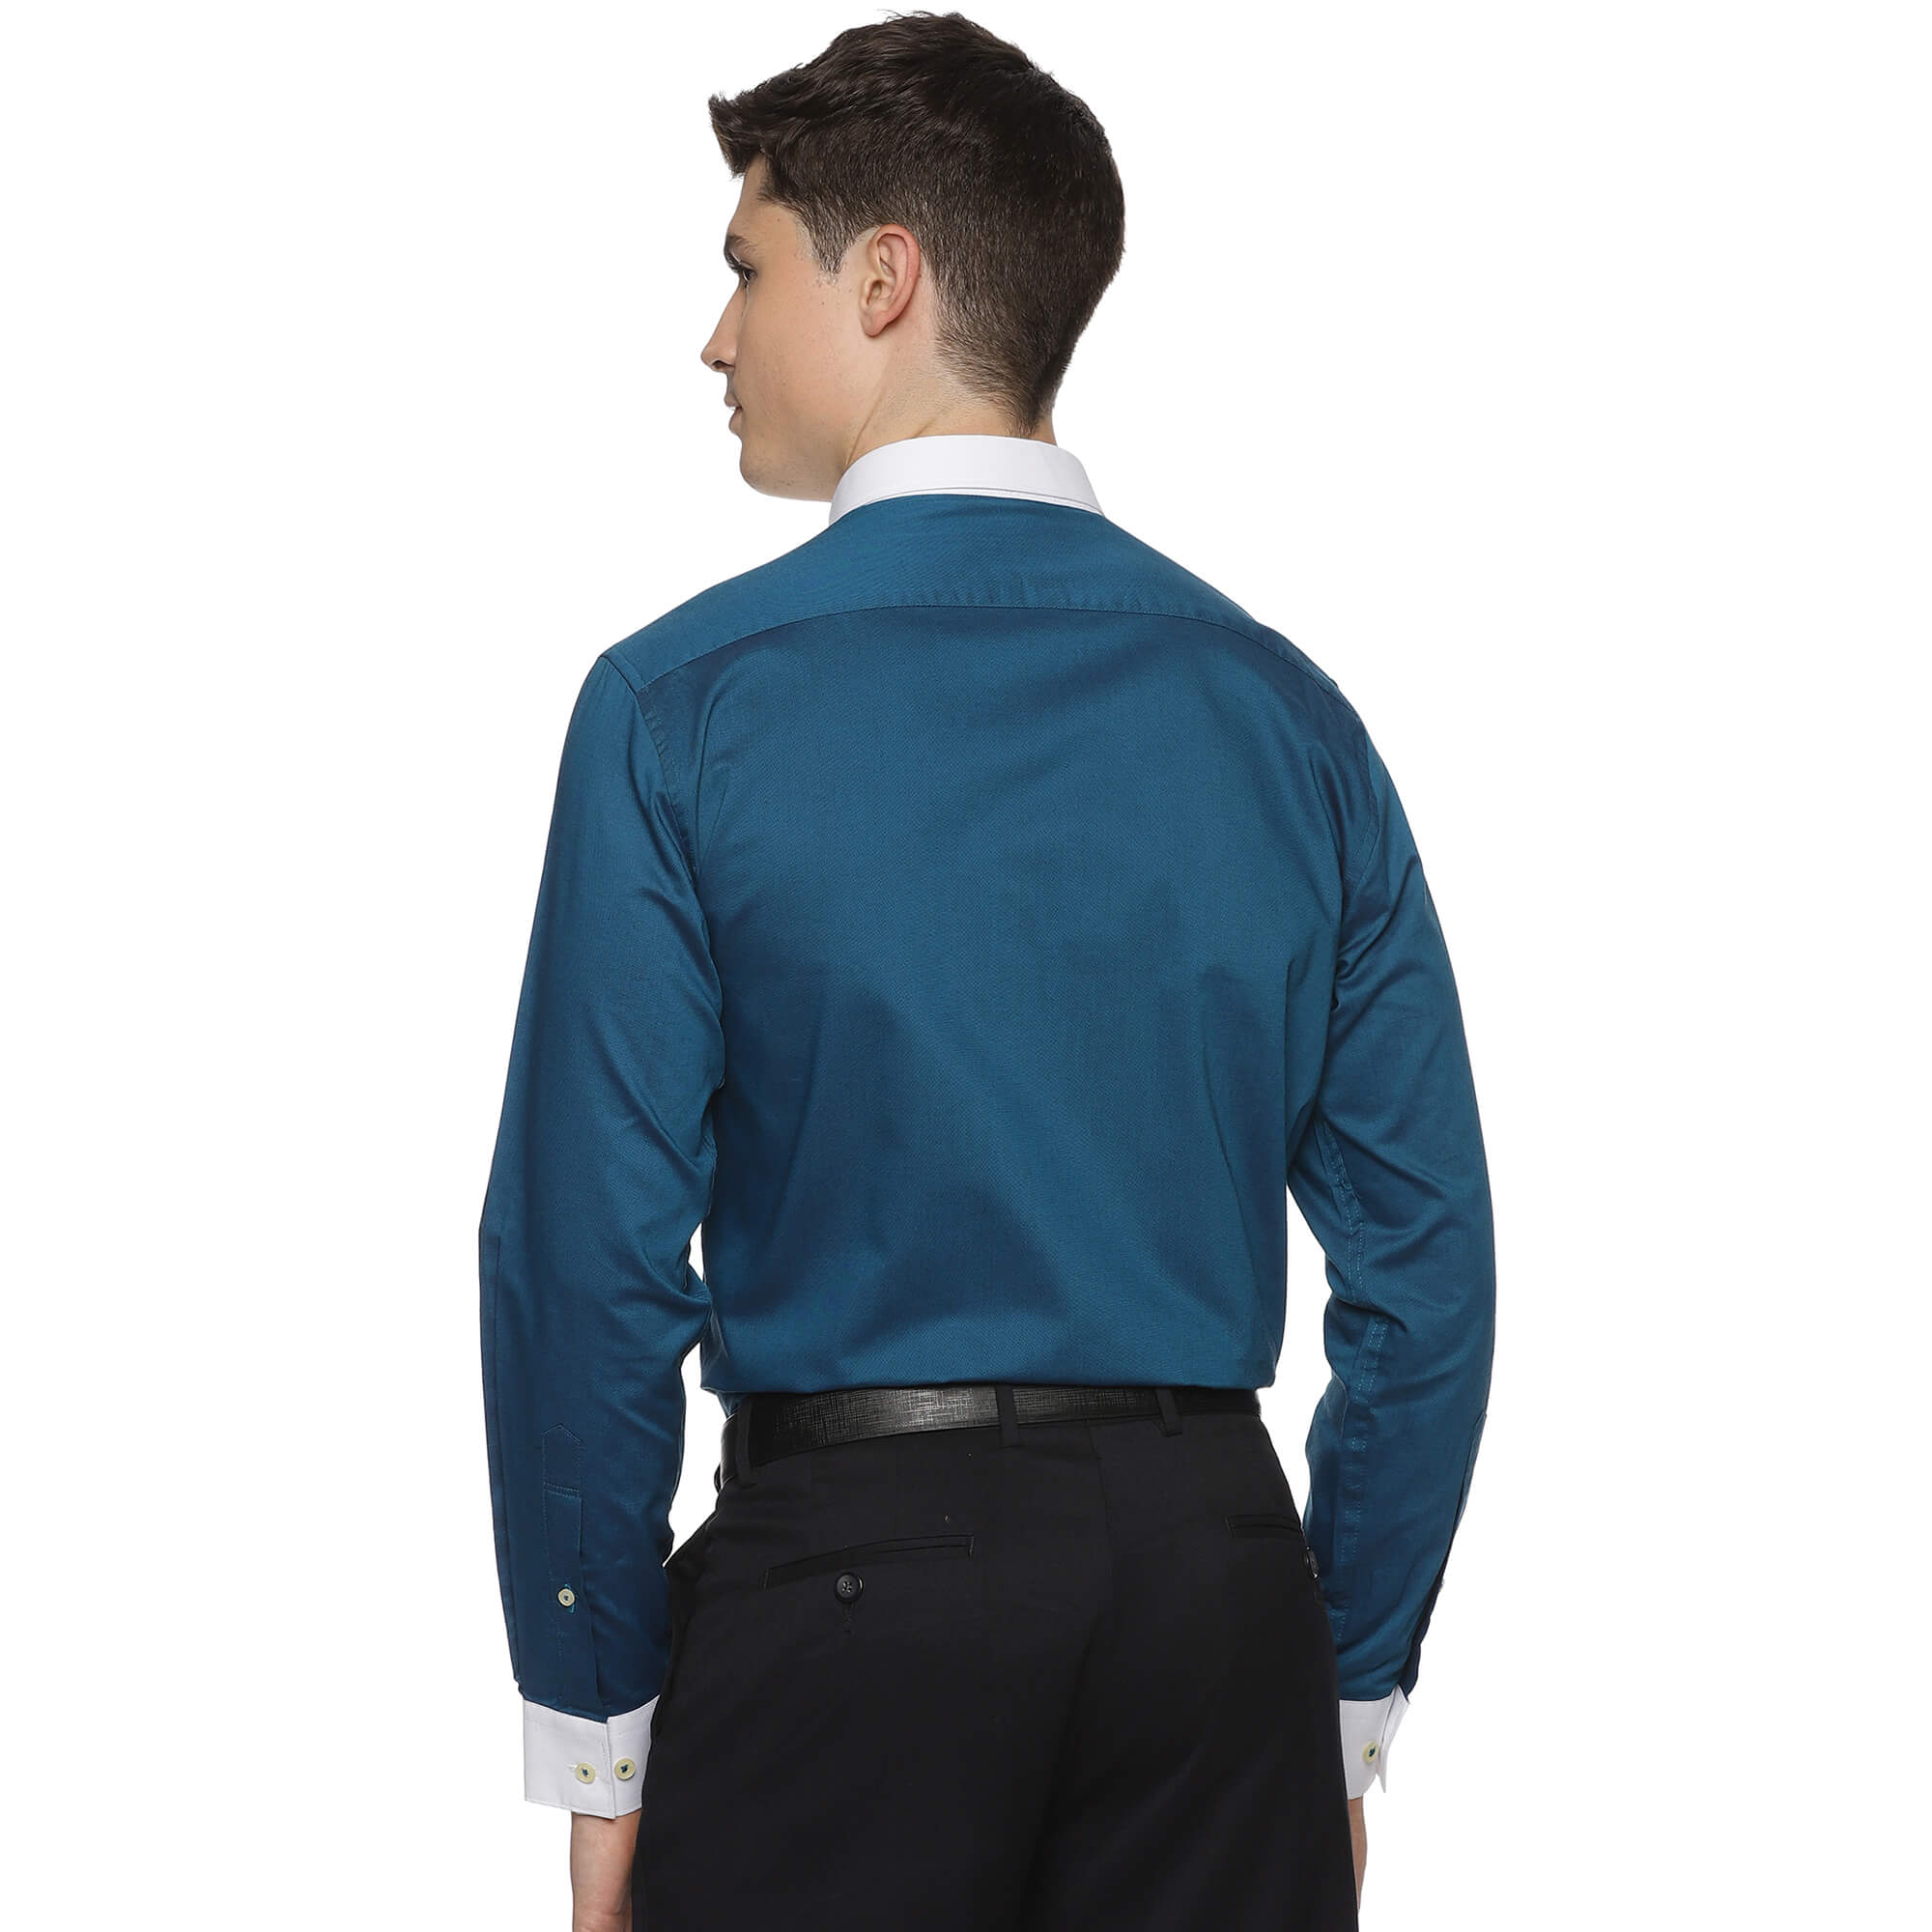 White Collar Solid Shirt In Dark Teal - The Formal Club